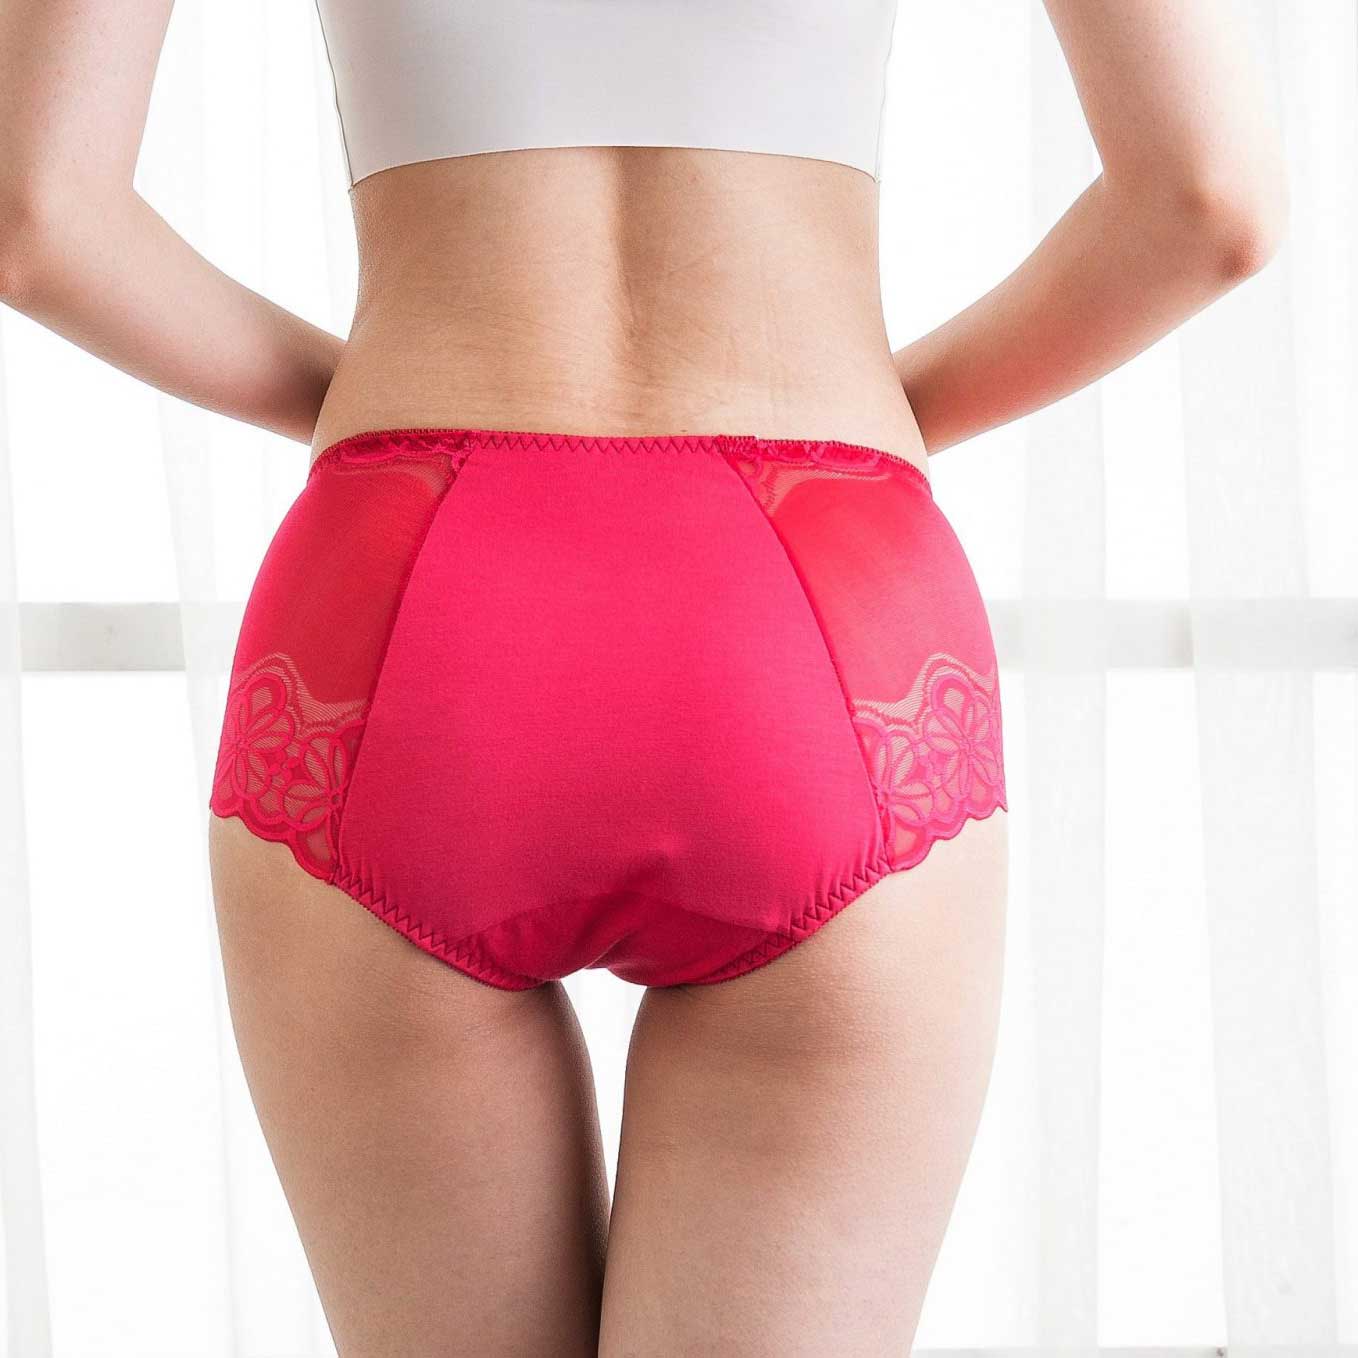 https://menstrualcup.co/wp-content/uploads/2023/02/LaliPanties-red-back-1.jpg